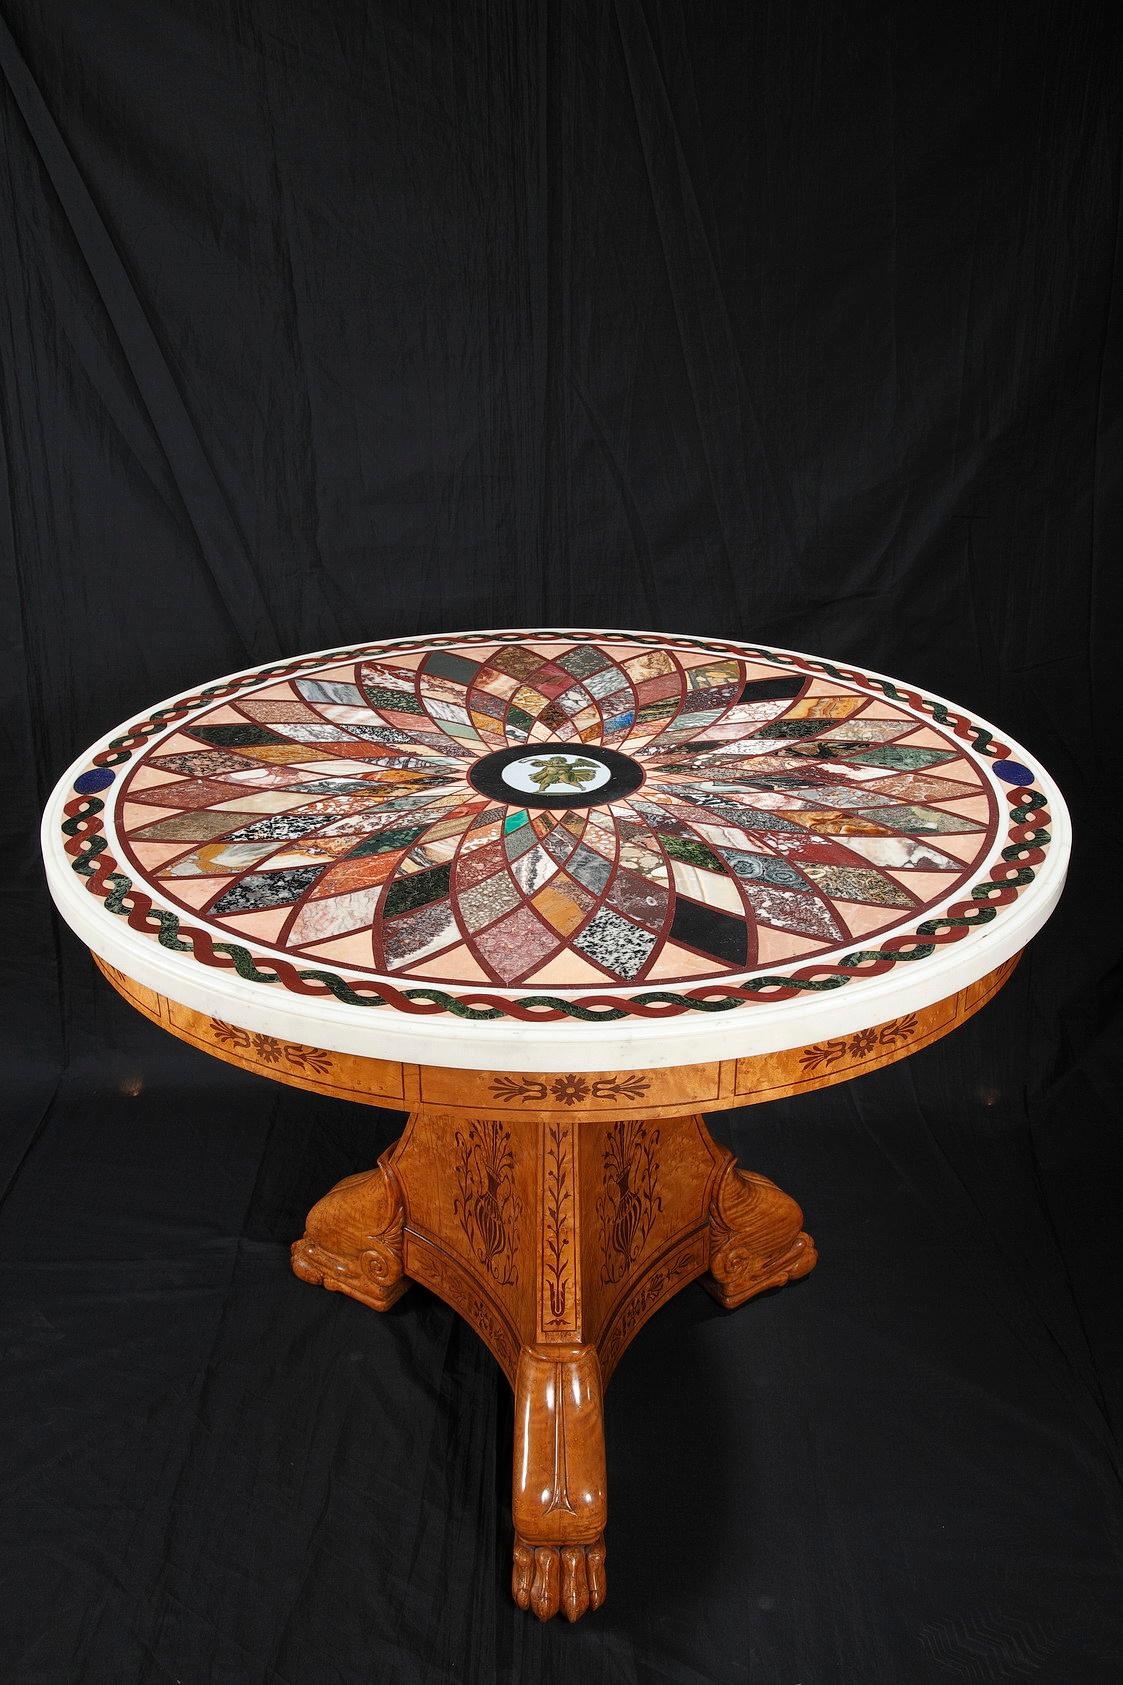 A Charles X period veneered wood center table resting on a central foot ended with three imposing claw-feet. The base and the belt of the table are adorned with wood marquetry decoration showing palms, vases and foliage garlands.

A remarkable